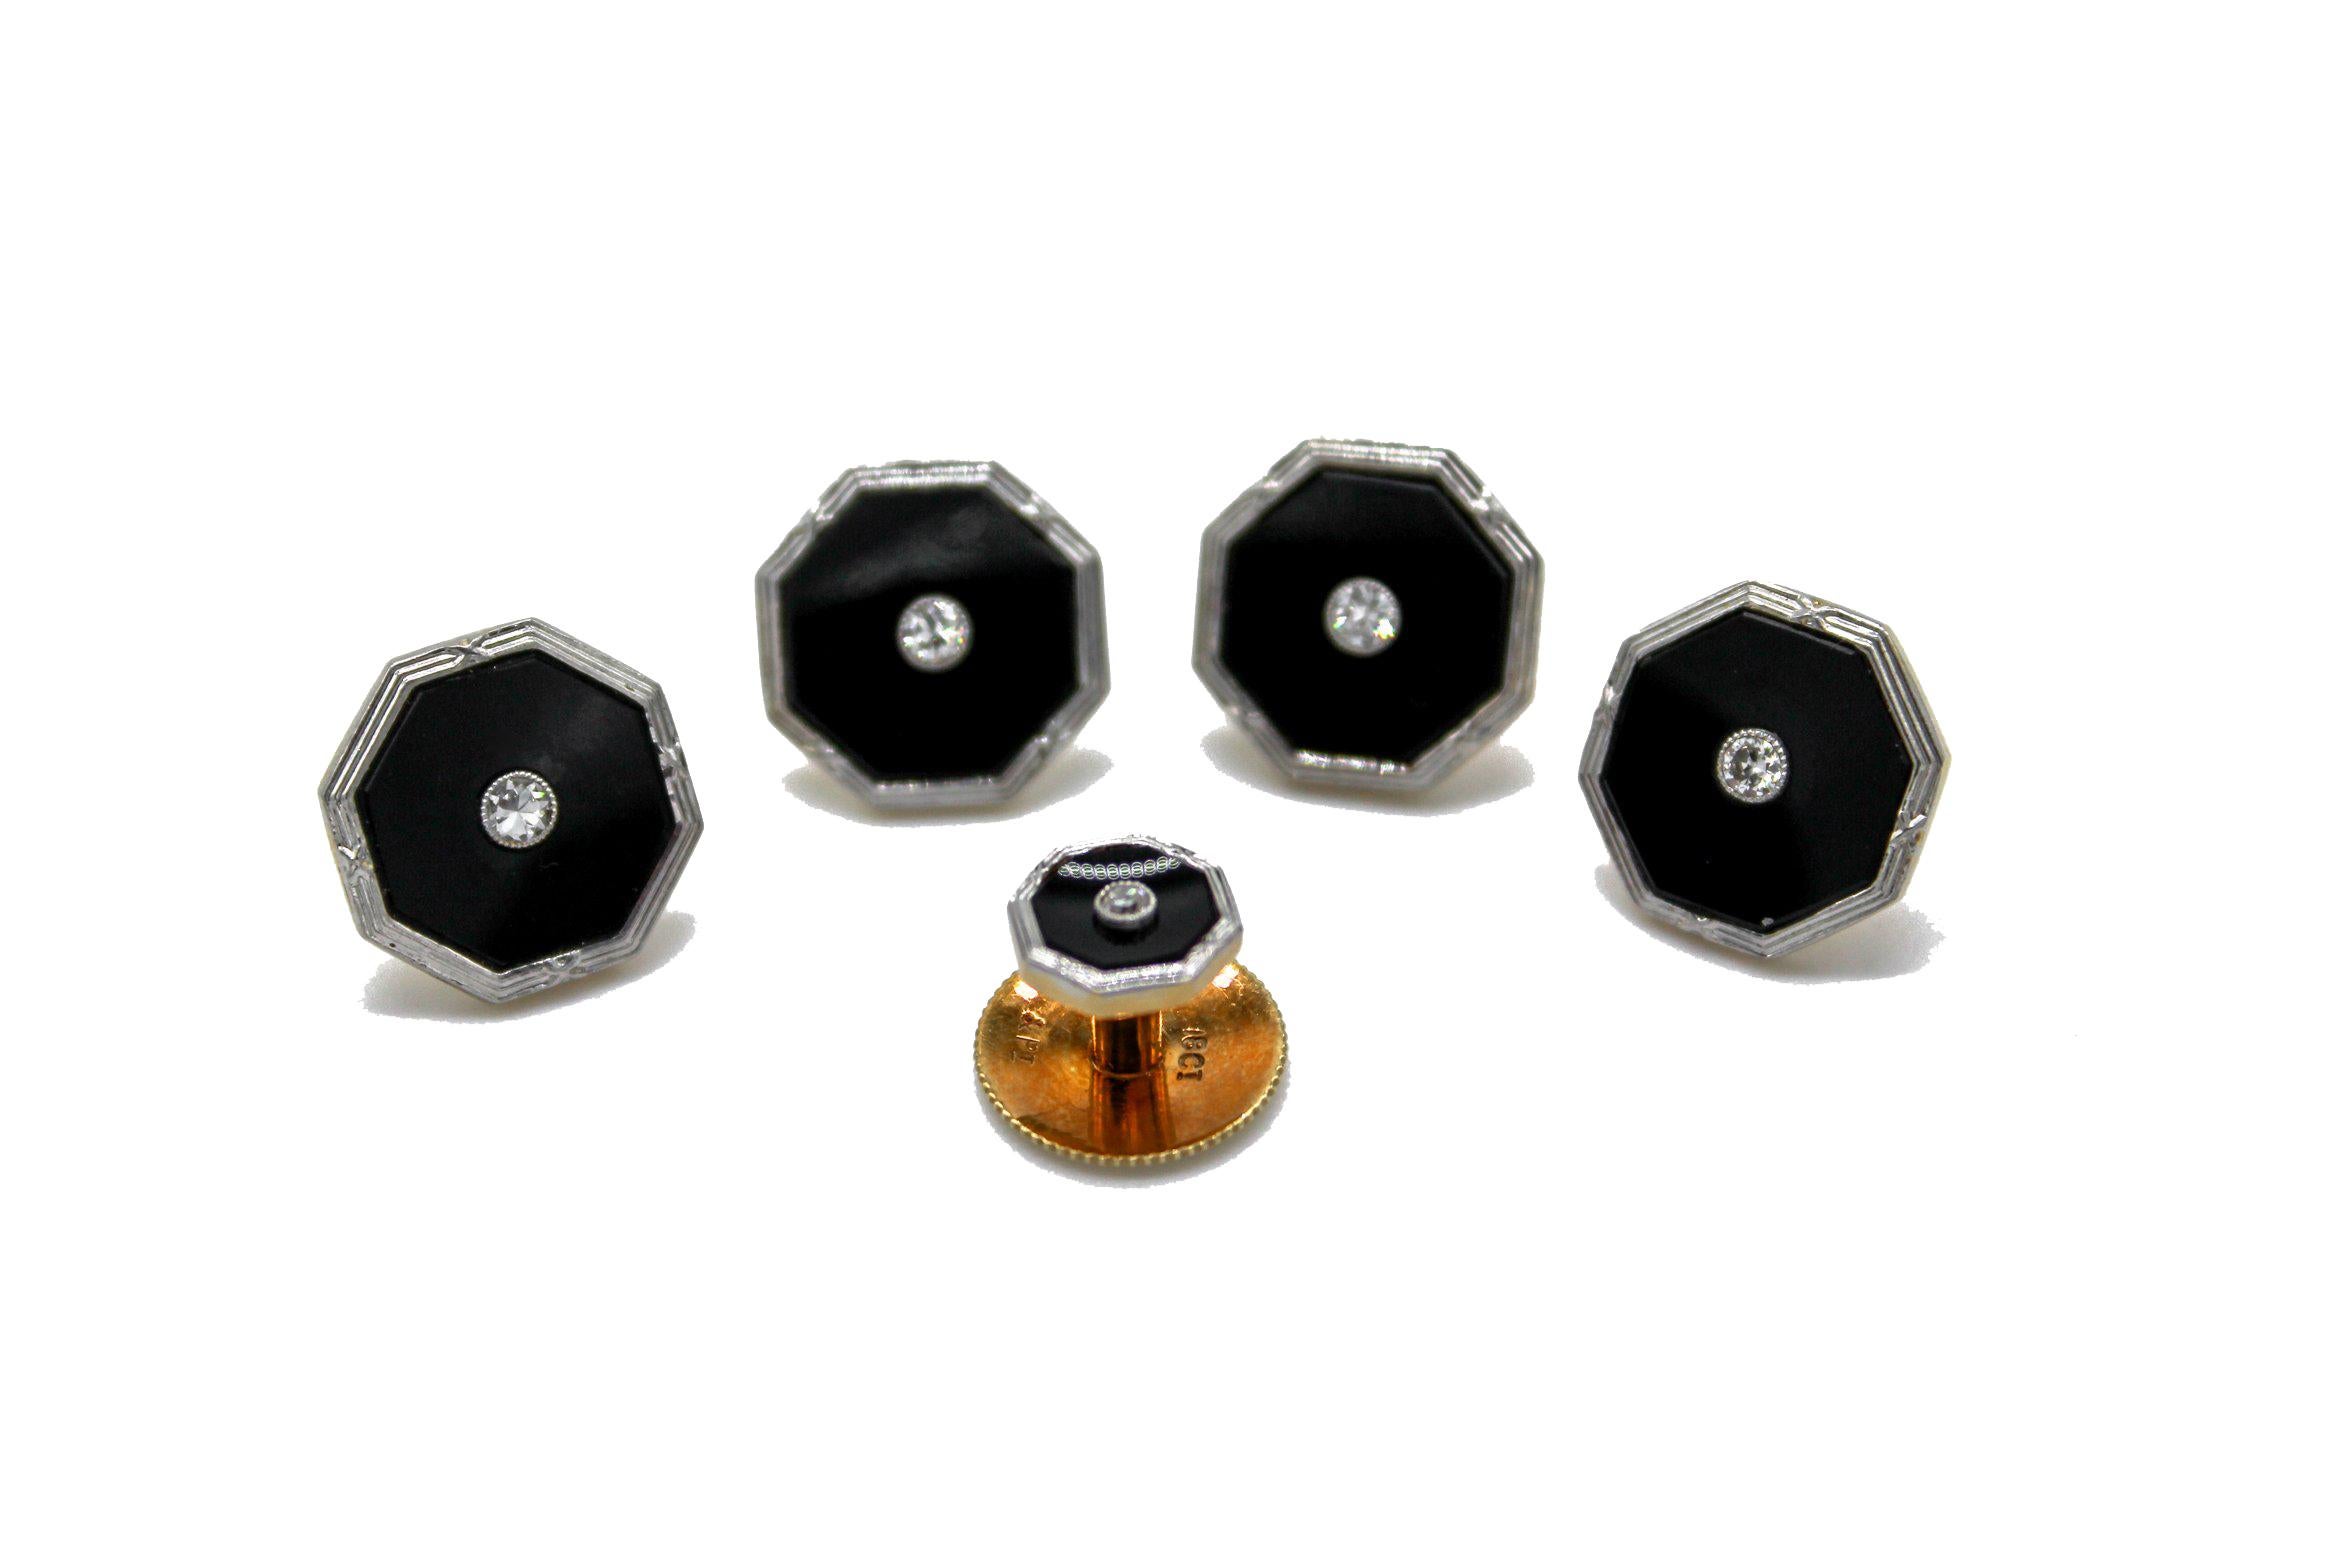 A Gentleman' Art Deco 18 Kt Gold, Platinum & Diamond Tuxedo Dress set, comprising a pair of cufflinks, four buttons and two collar studs. Each 12 mm octagonal button and cufflink backed with 18 karat yellow gold, the black onyx face edged in